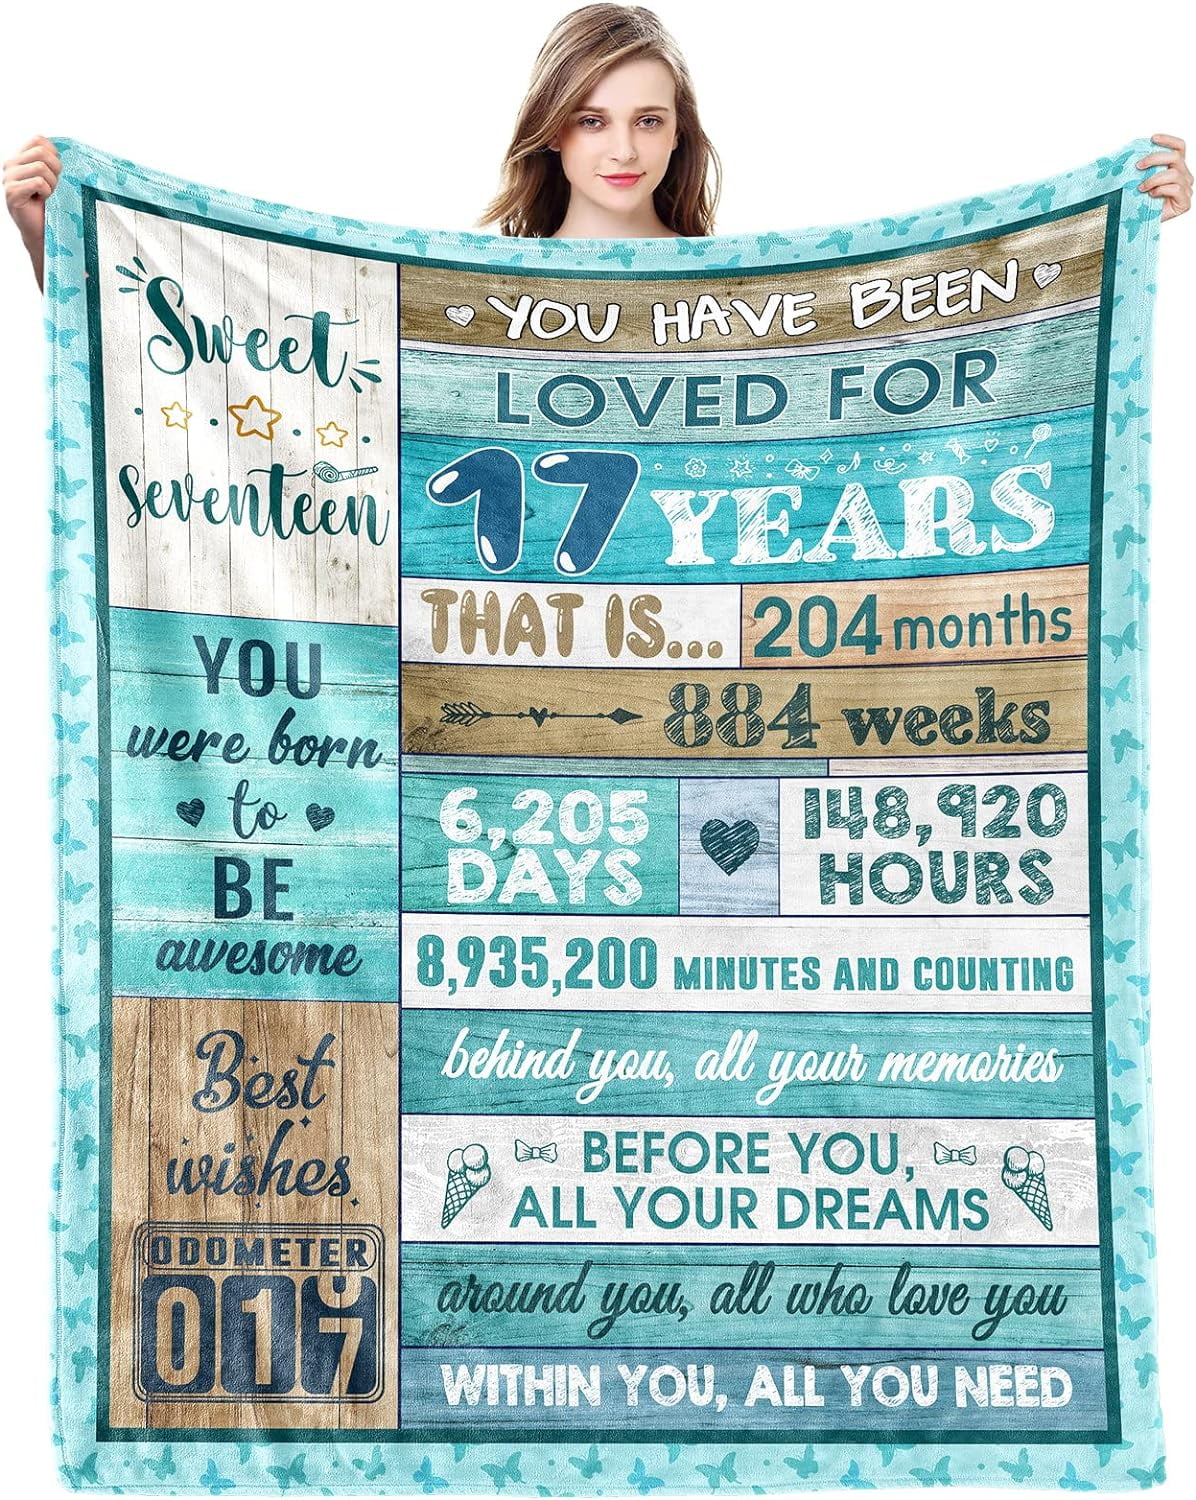 17 Year Old Girl Gift Ideas,to 17th Birthday Blanket 60X50 In,Gifts for 17  Year Old Girl Boy,17 Year Old Boy Gift Ideas,17th Birthday Gifts for  Girls,Sweet 17 Blanket,17th Birthday Decorations 